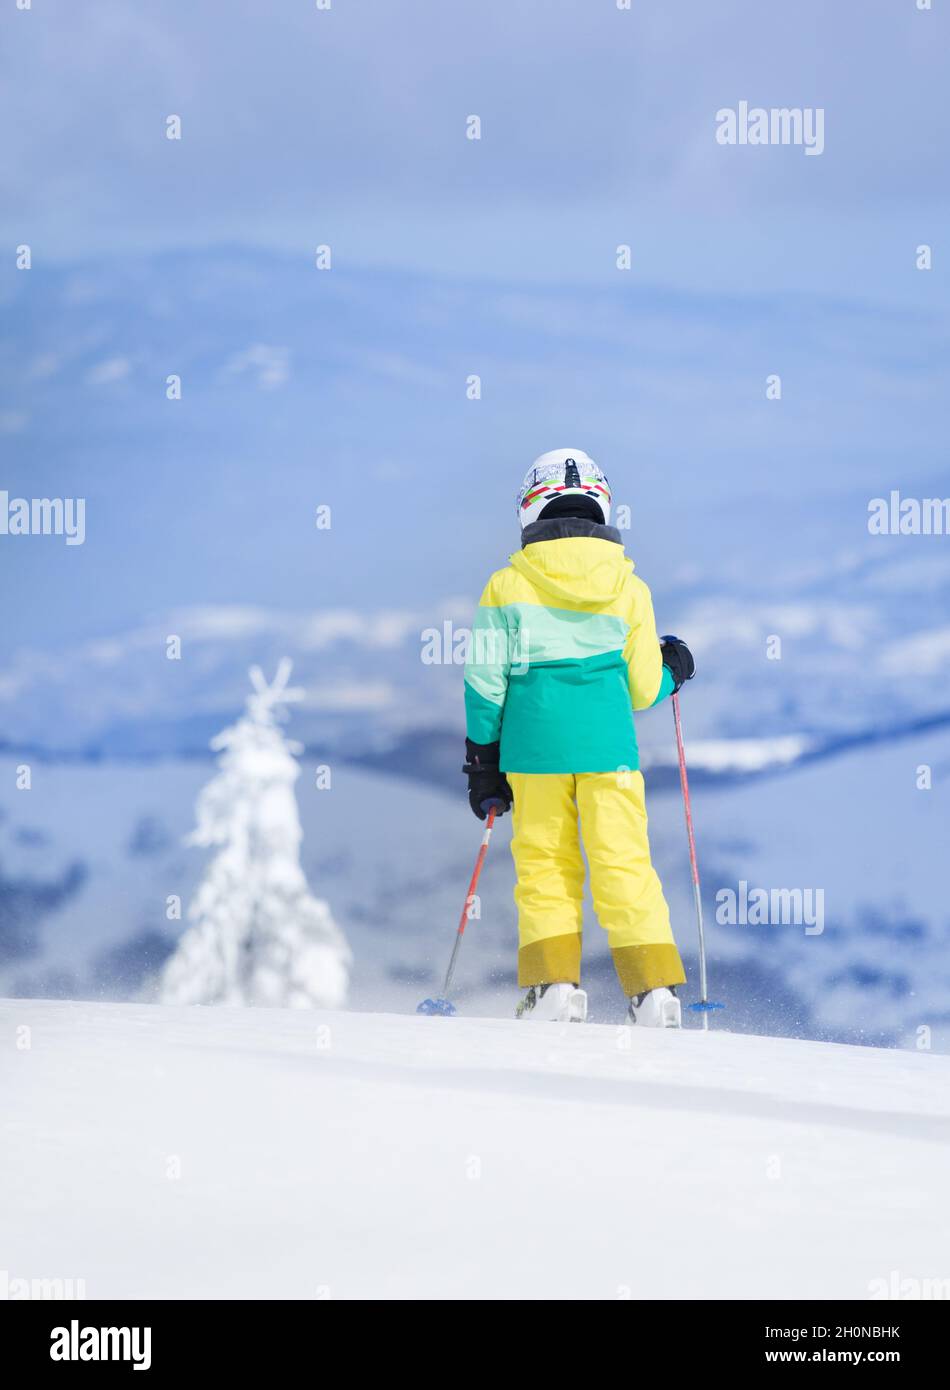 Rear view of child skiing on peak of mountain. Winter sport and recreation concept Stock Photo